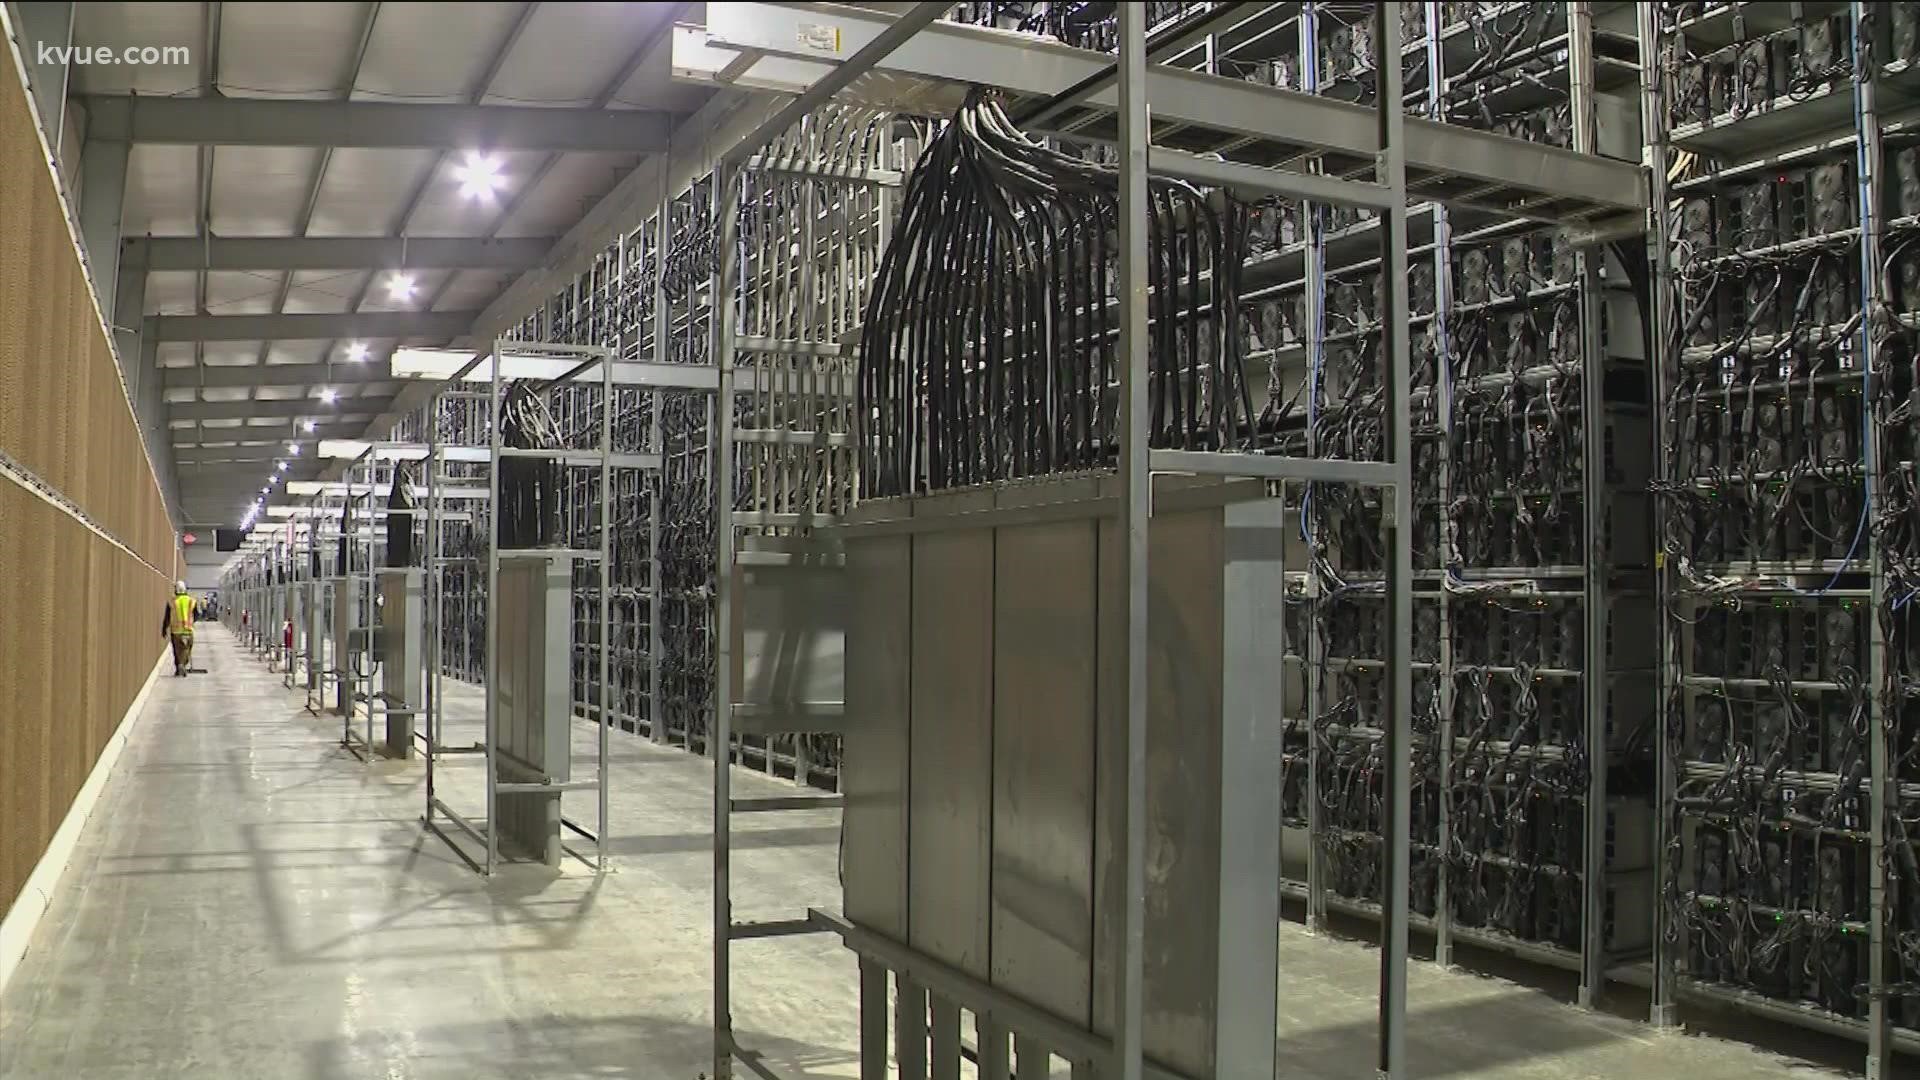 While crypto-mining supporters say Bitcoin mining brings balance to the Texas grid, others say it needs to be regulated to make sure of that.